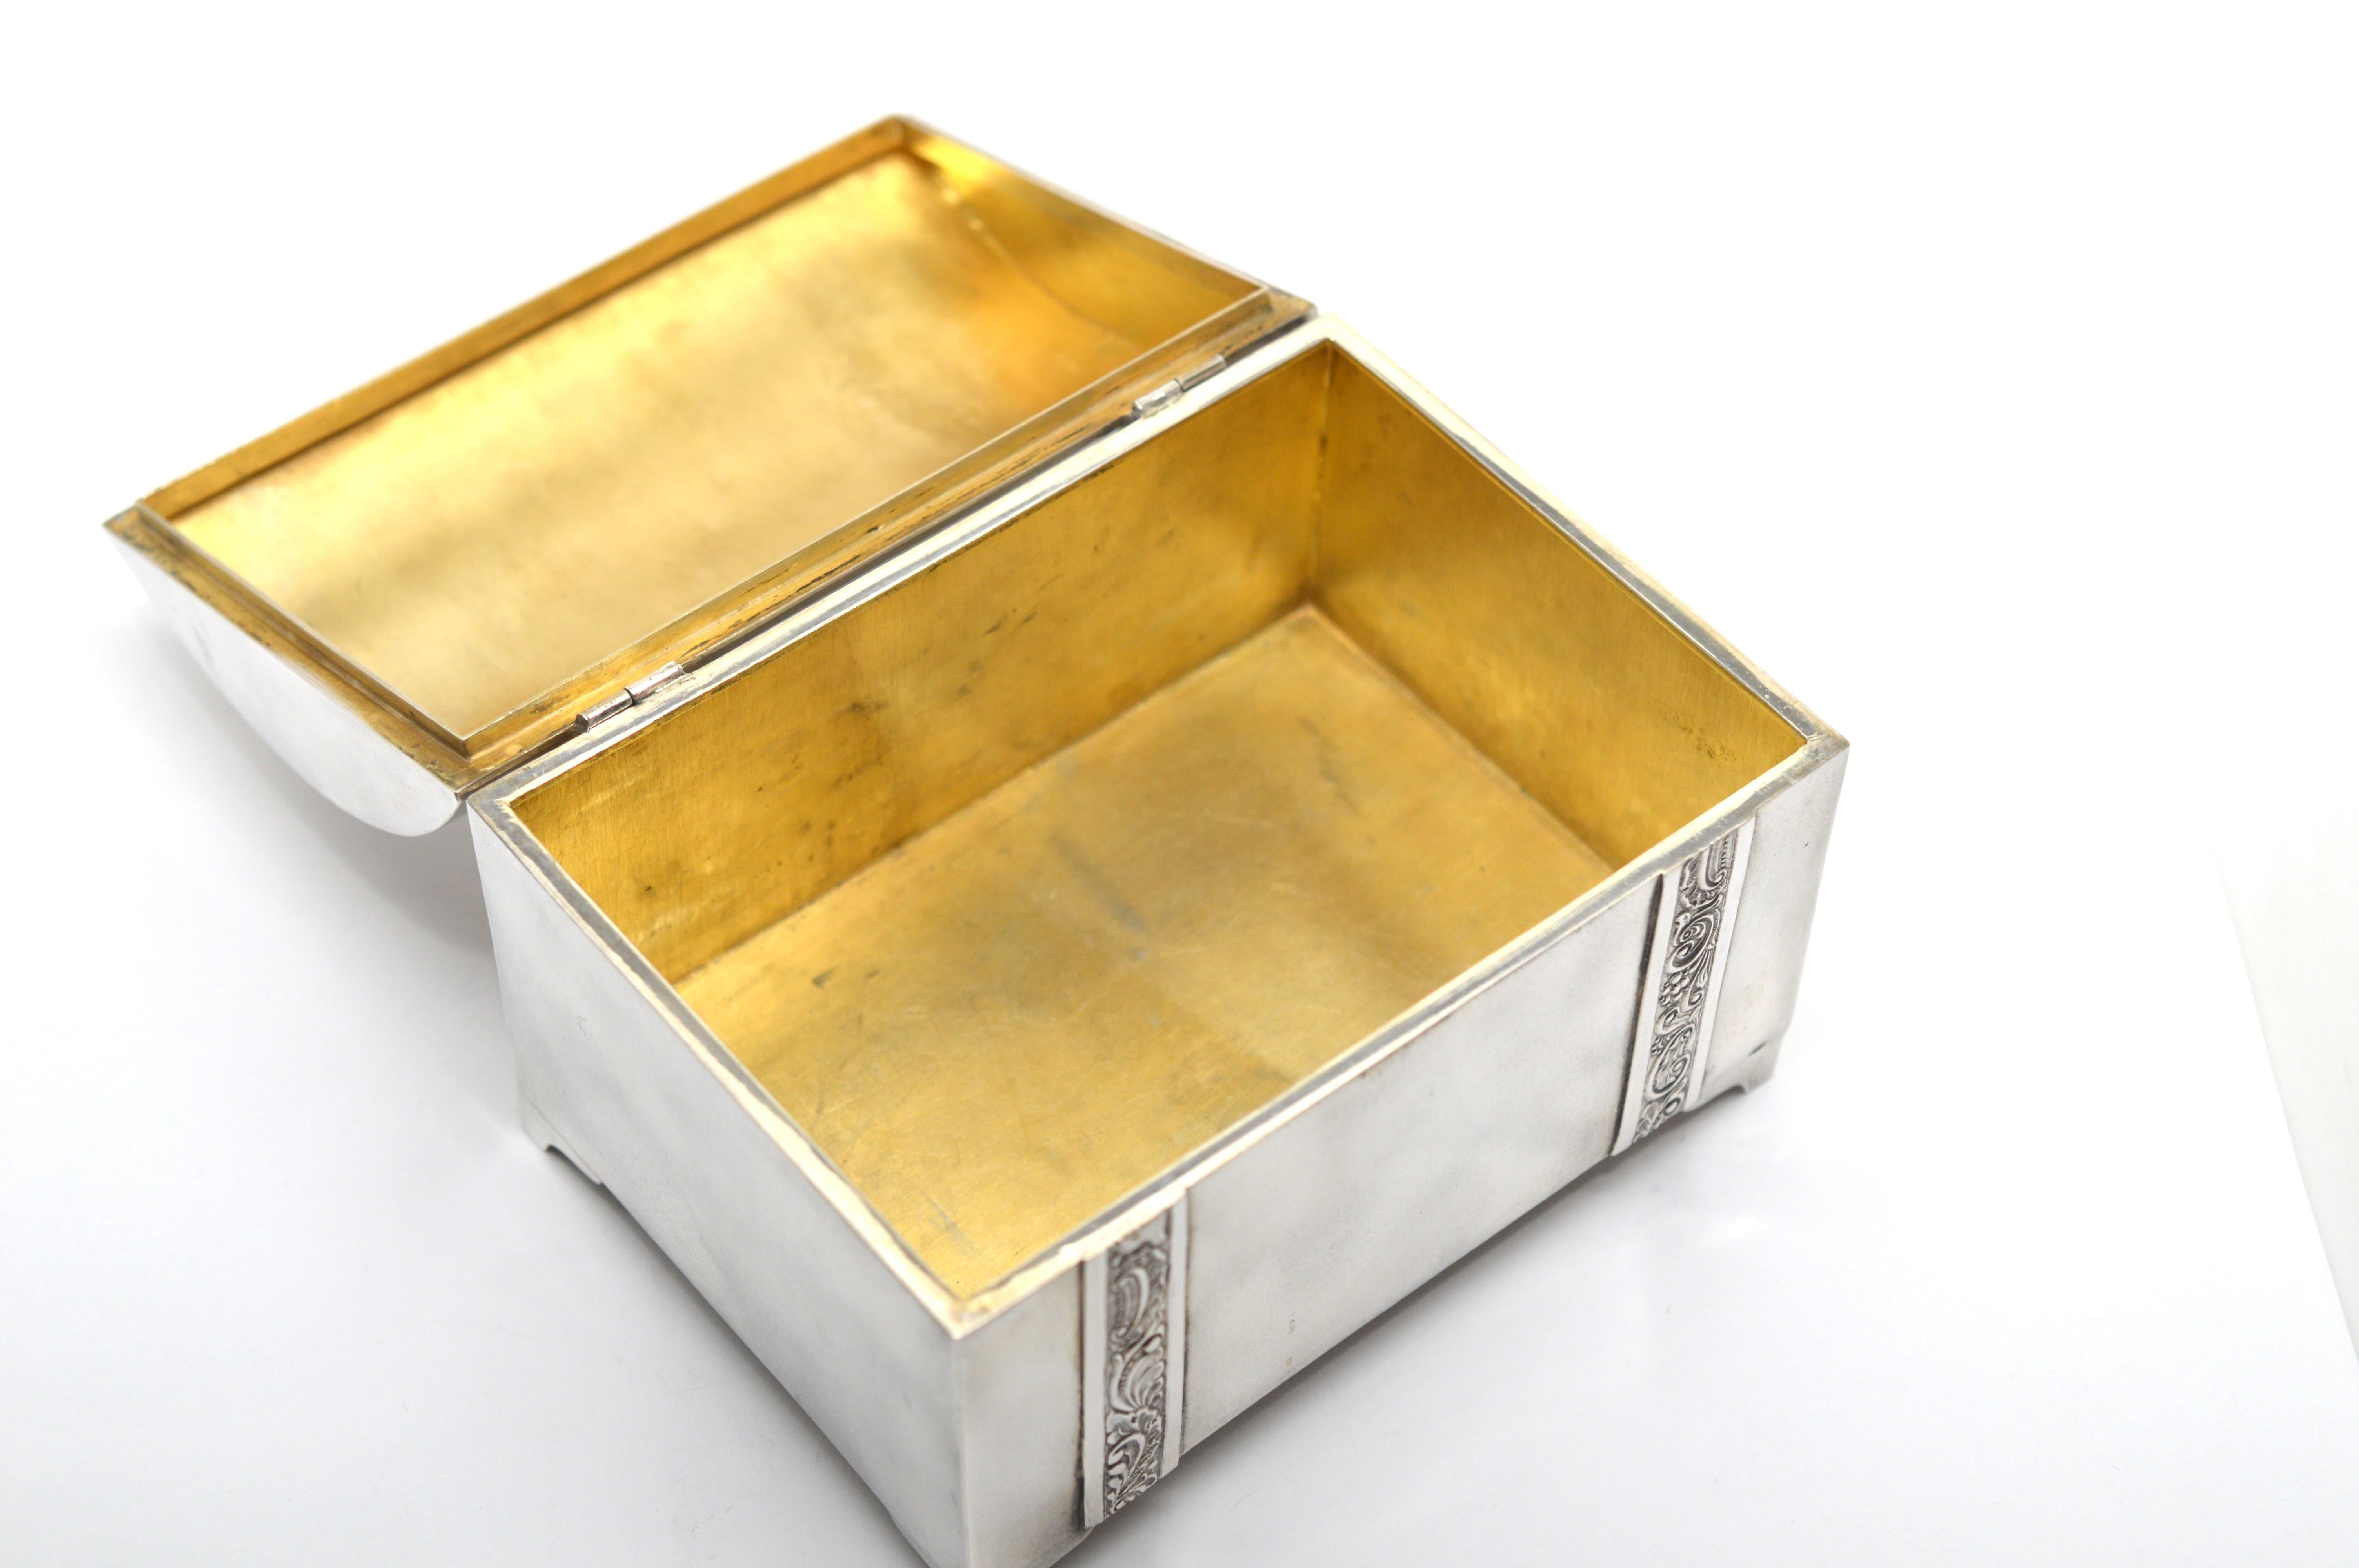 Handmade craftsman Pre War Estonian 875 Silver Box with gilded interior. Table top chest design wit contoured top measures approximately  4-3/4 inch long by 3-3/8 inch wide x 2-3/4 high. Great conversation piece for coffee table or collector.